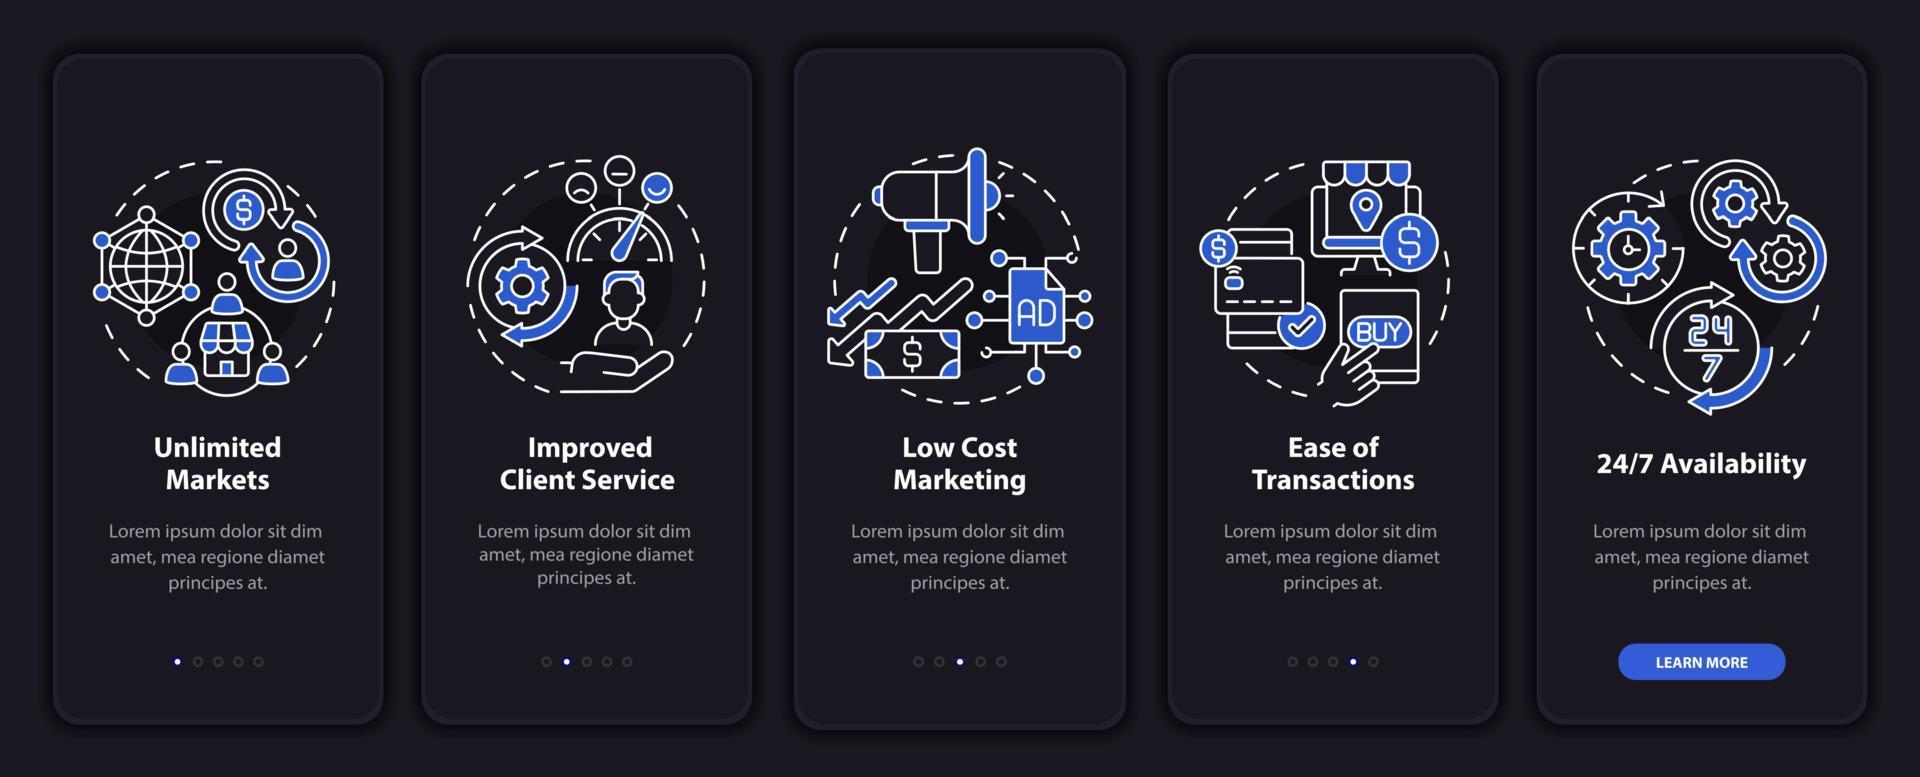 Digital entrepreneurship pros onboarding mobile app page screen. Client service walkthrough 5 steps graphic instructions with concepts. UI, UX, GUI vector template with linear night mode illustrations